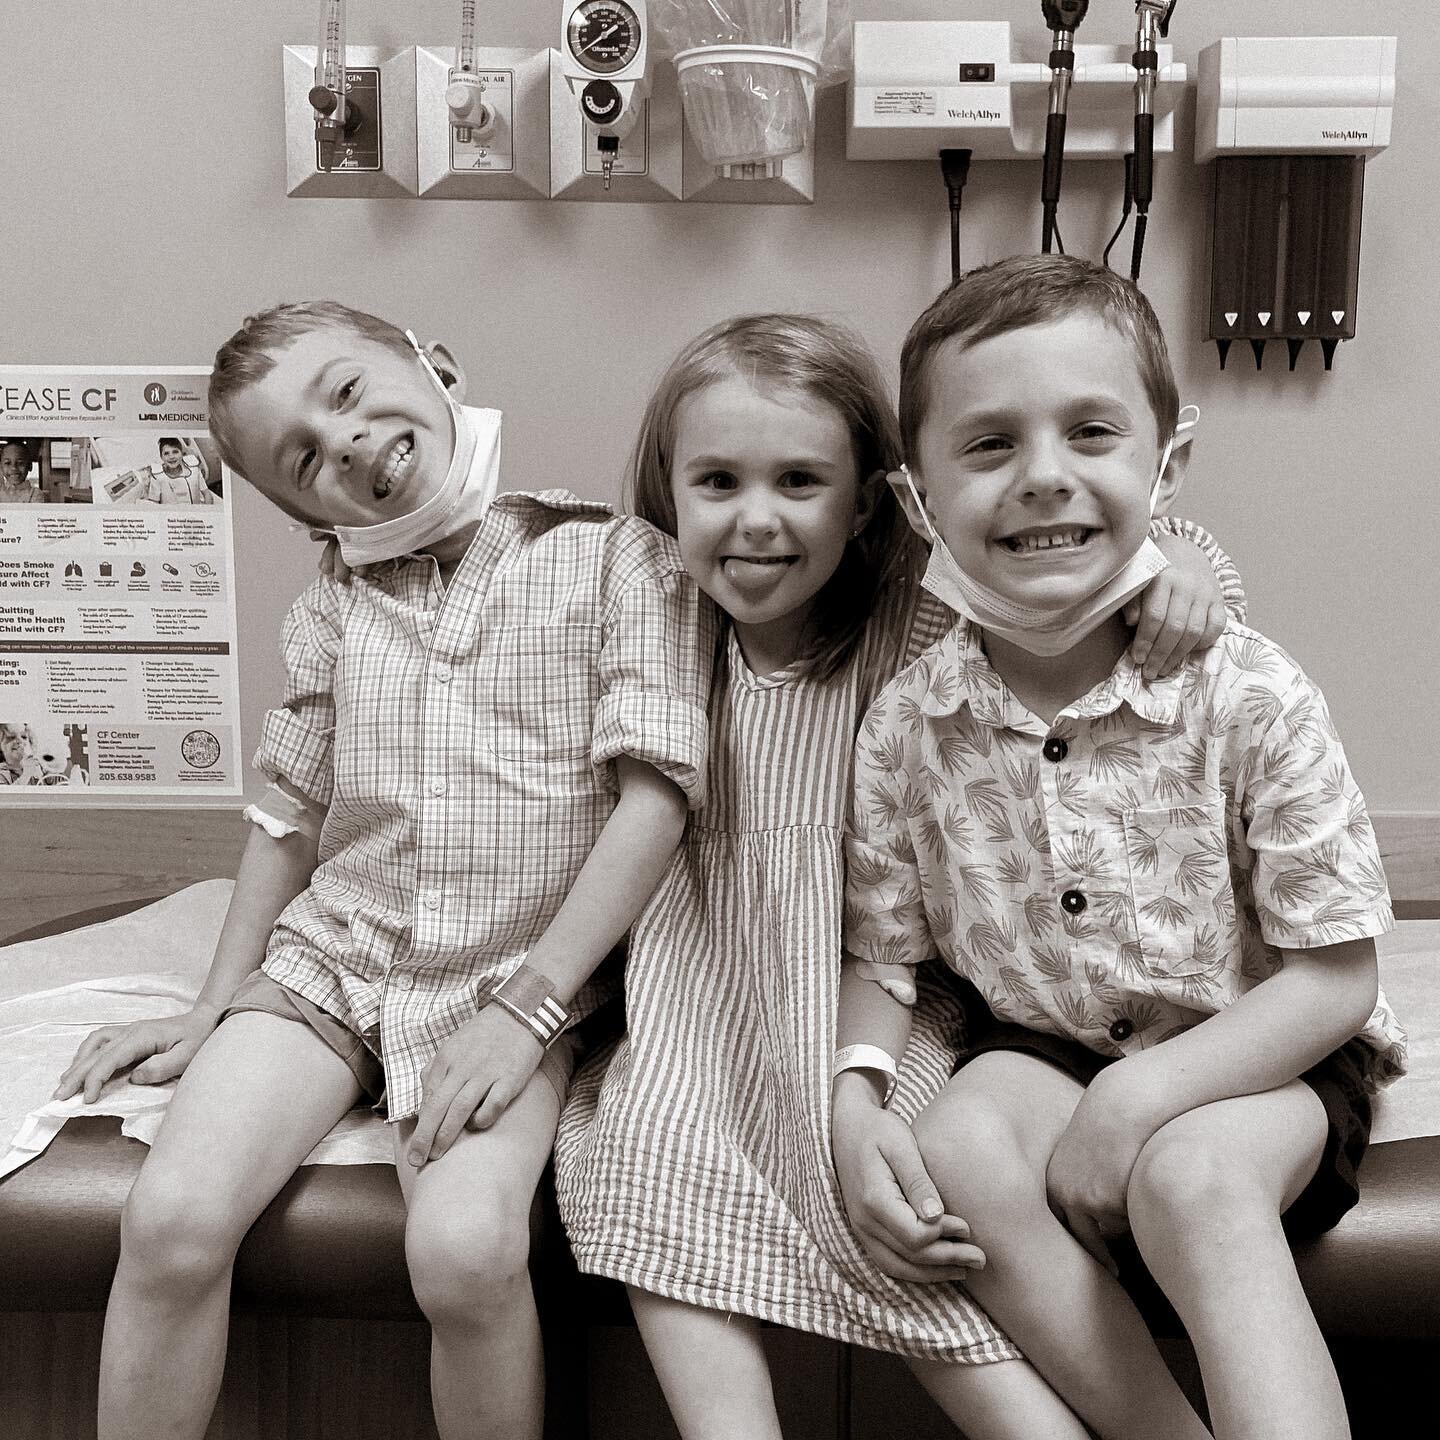 CF Clinic Update//

Mixed news at the CF Clinic yesterday. 
Their weight gain wasn&rsquo;t great - Merritt lost weight but Cam did gain some weight. 
Merritt got taller (1cm in a month) and Cam stayed the same. 
Their liver enzymes were slightly elev